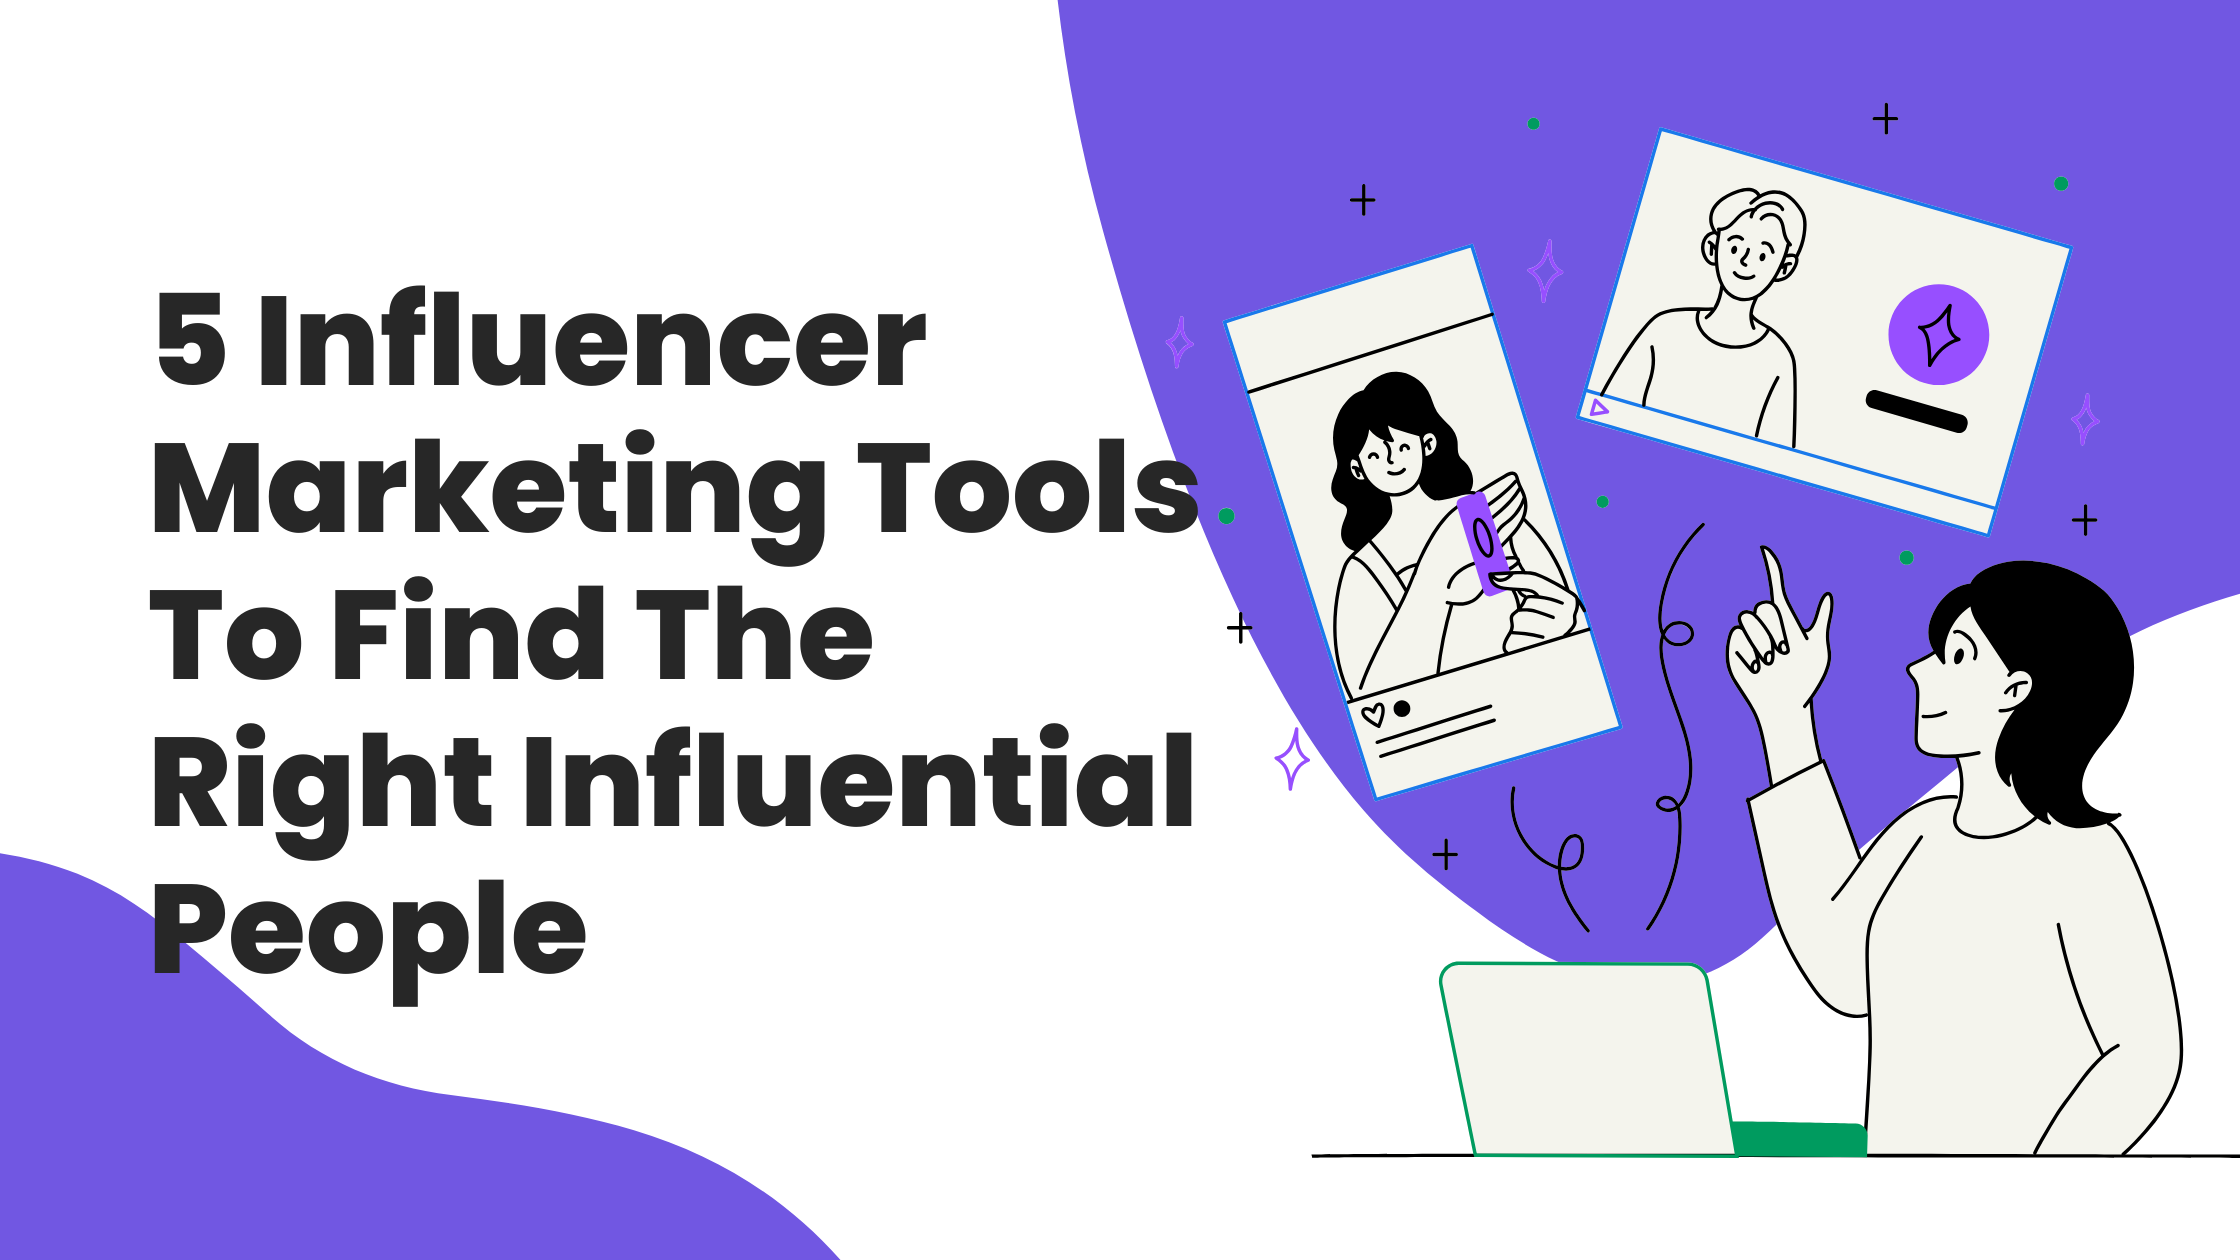 5 Influencer Marketing Tools To Find The Right Influential People